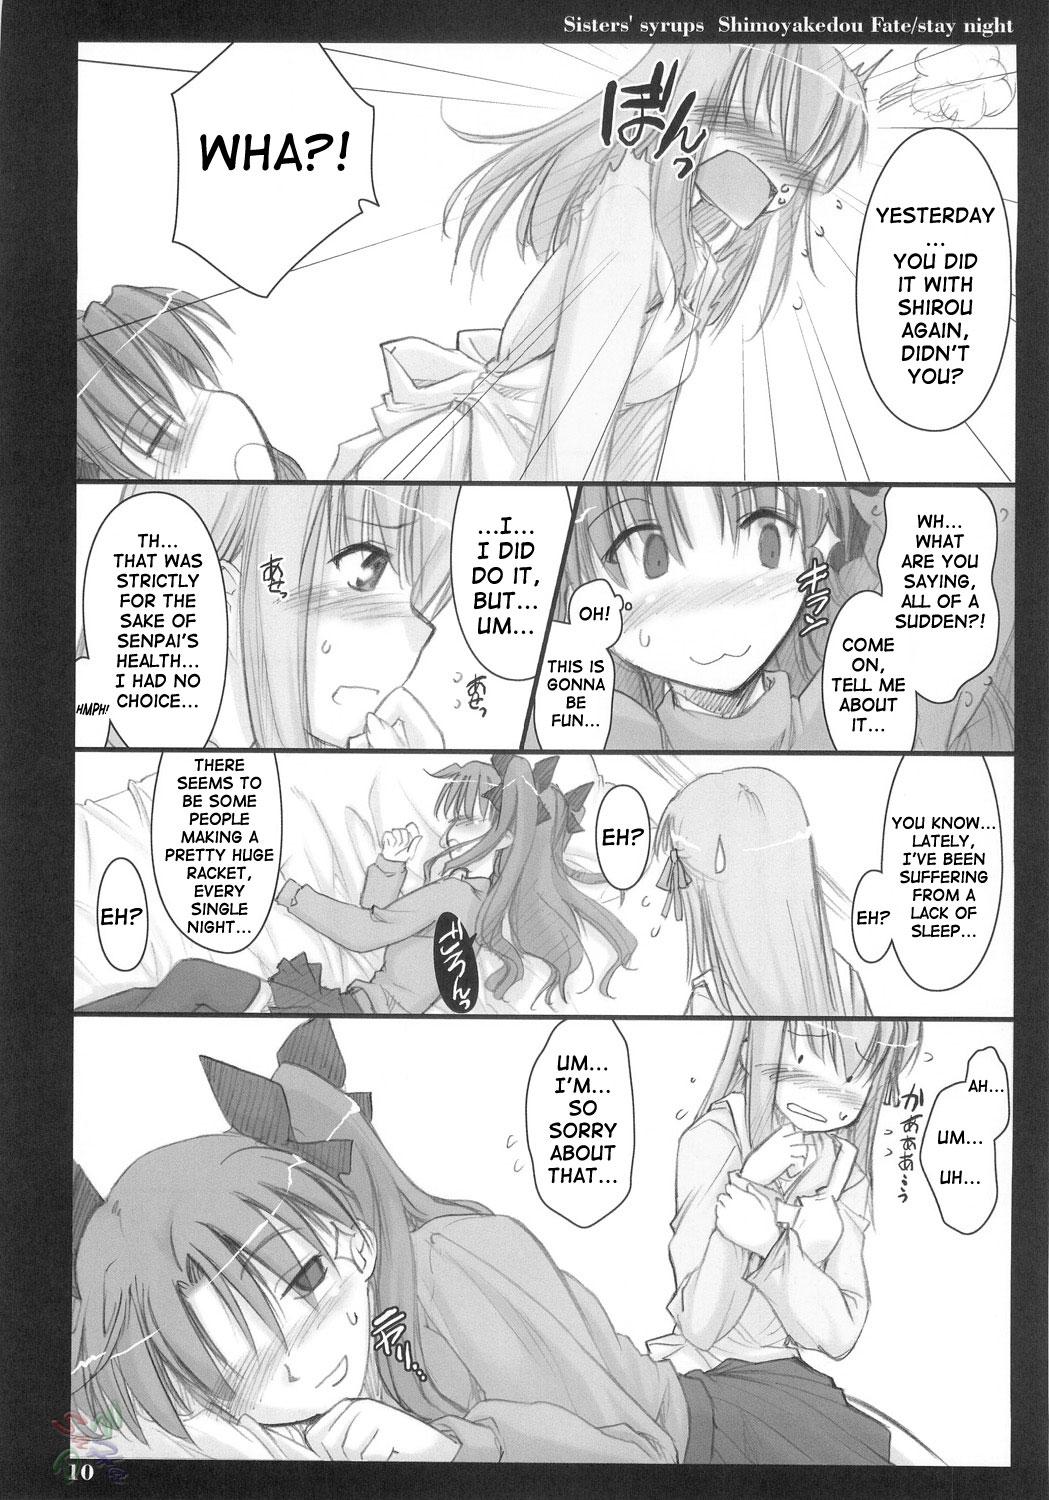 Cuckolding Sisters' Syrups - Fate stay night Babysitter - Page 9